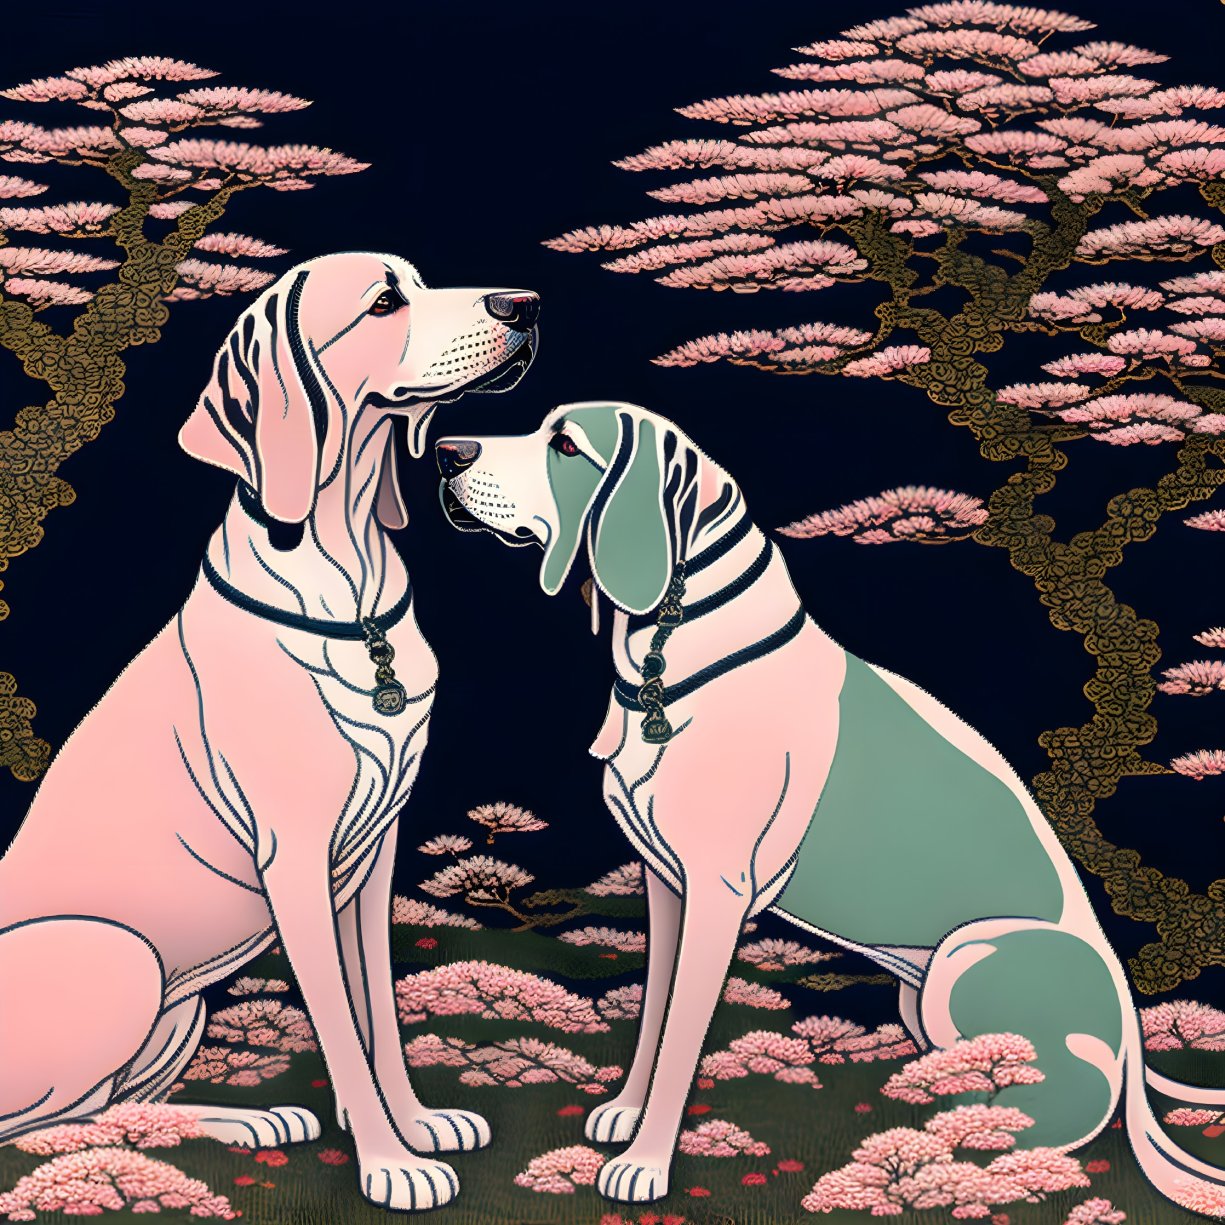 Stylized dogs under cherry blossom trees at night